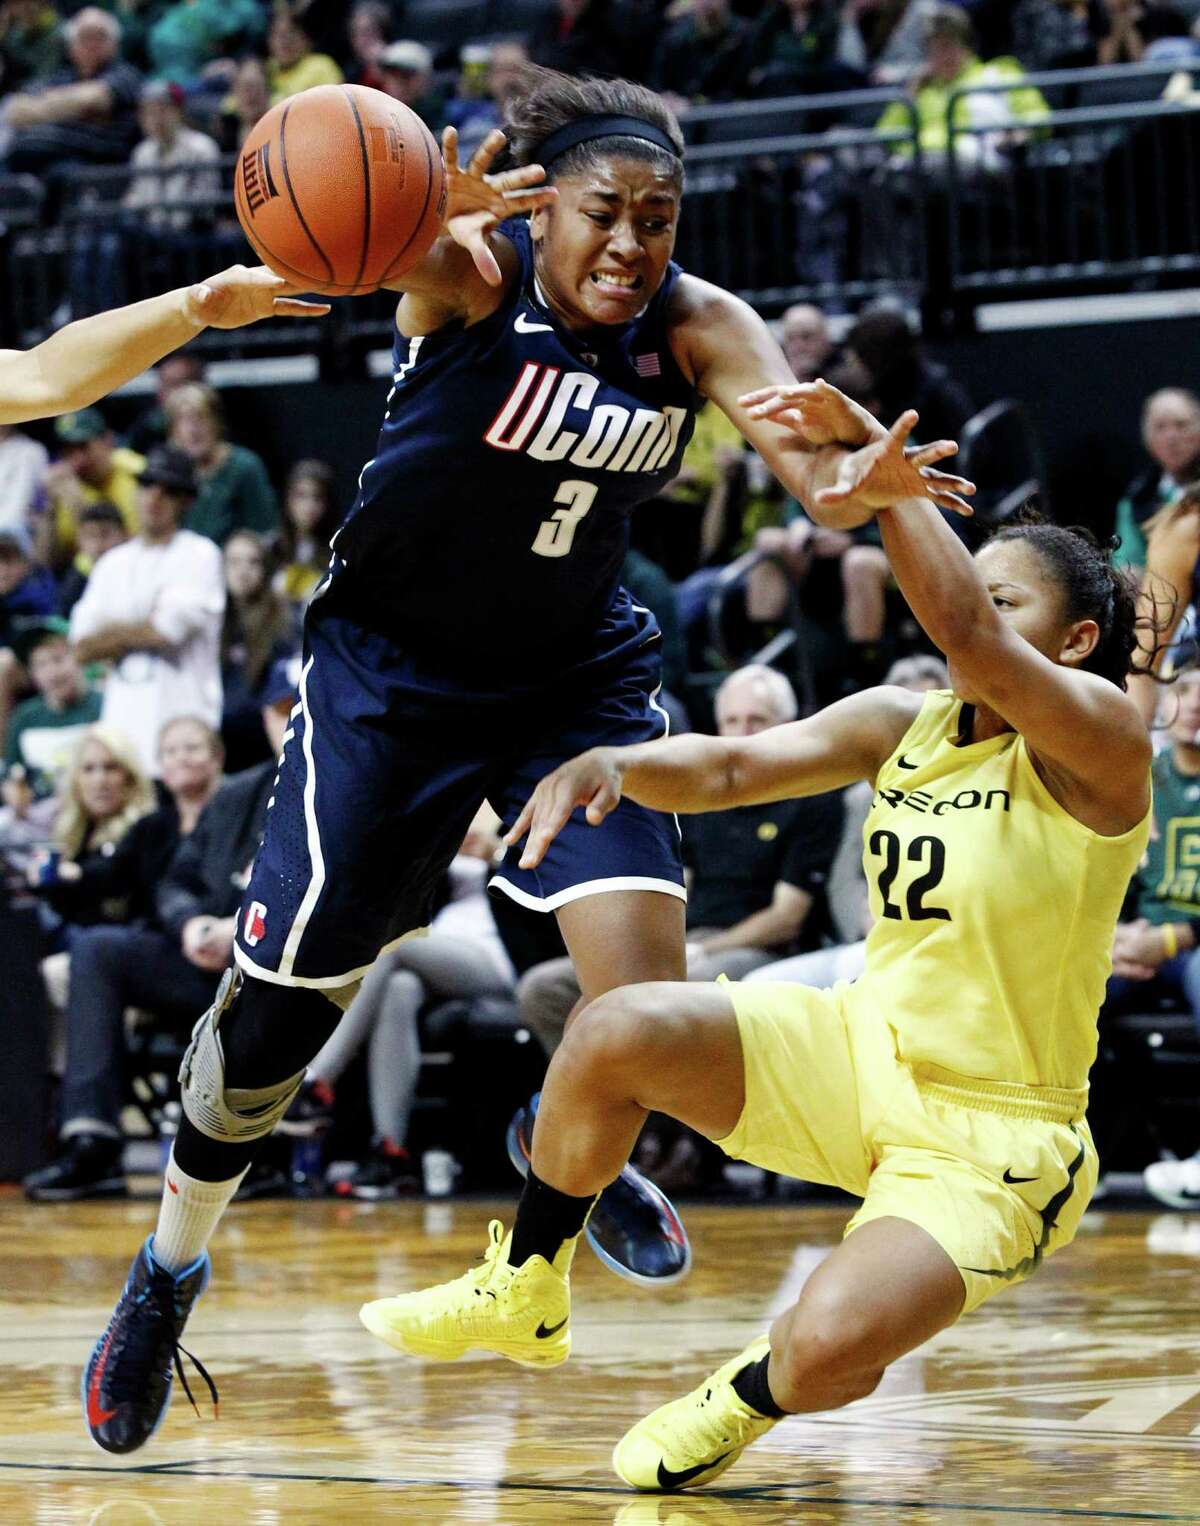 Connecticut forward Morgan Tuck, left, is fouled on her way to the basket by Oregon guard Ariel Thomas during the second half of an NCAA college basketball game in Eugene, Ore., Monday, Dec. 31, 2012. Connecticut won 95-51. (AP Photo/Don Ryan)